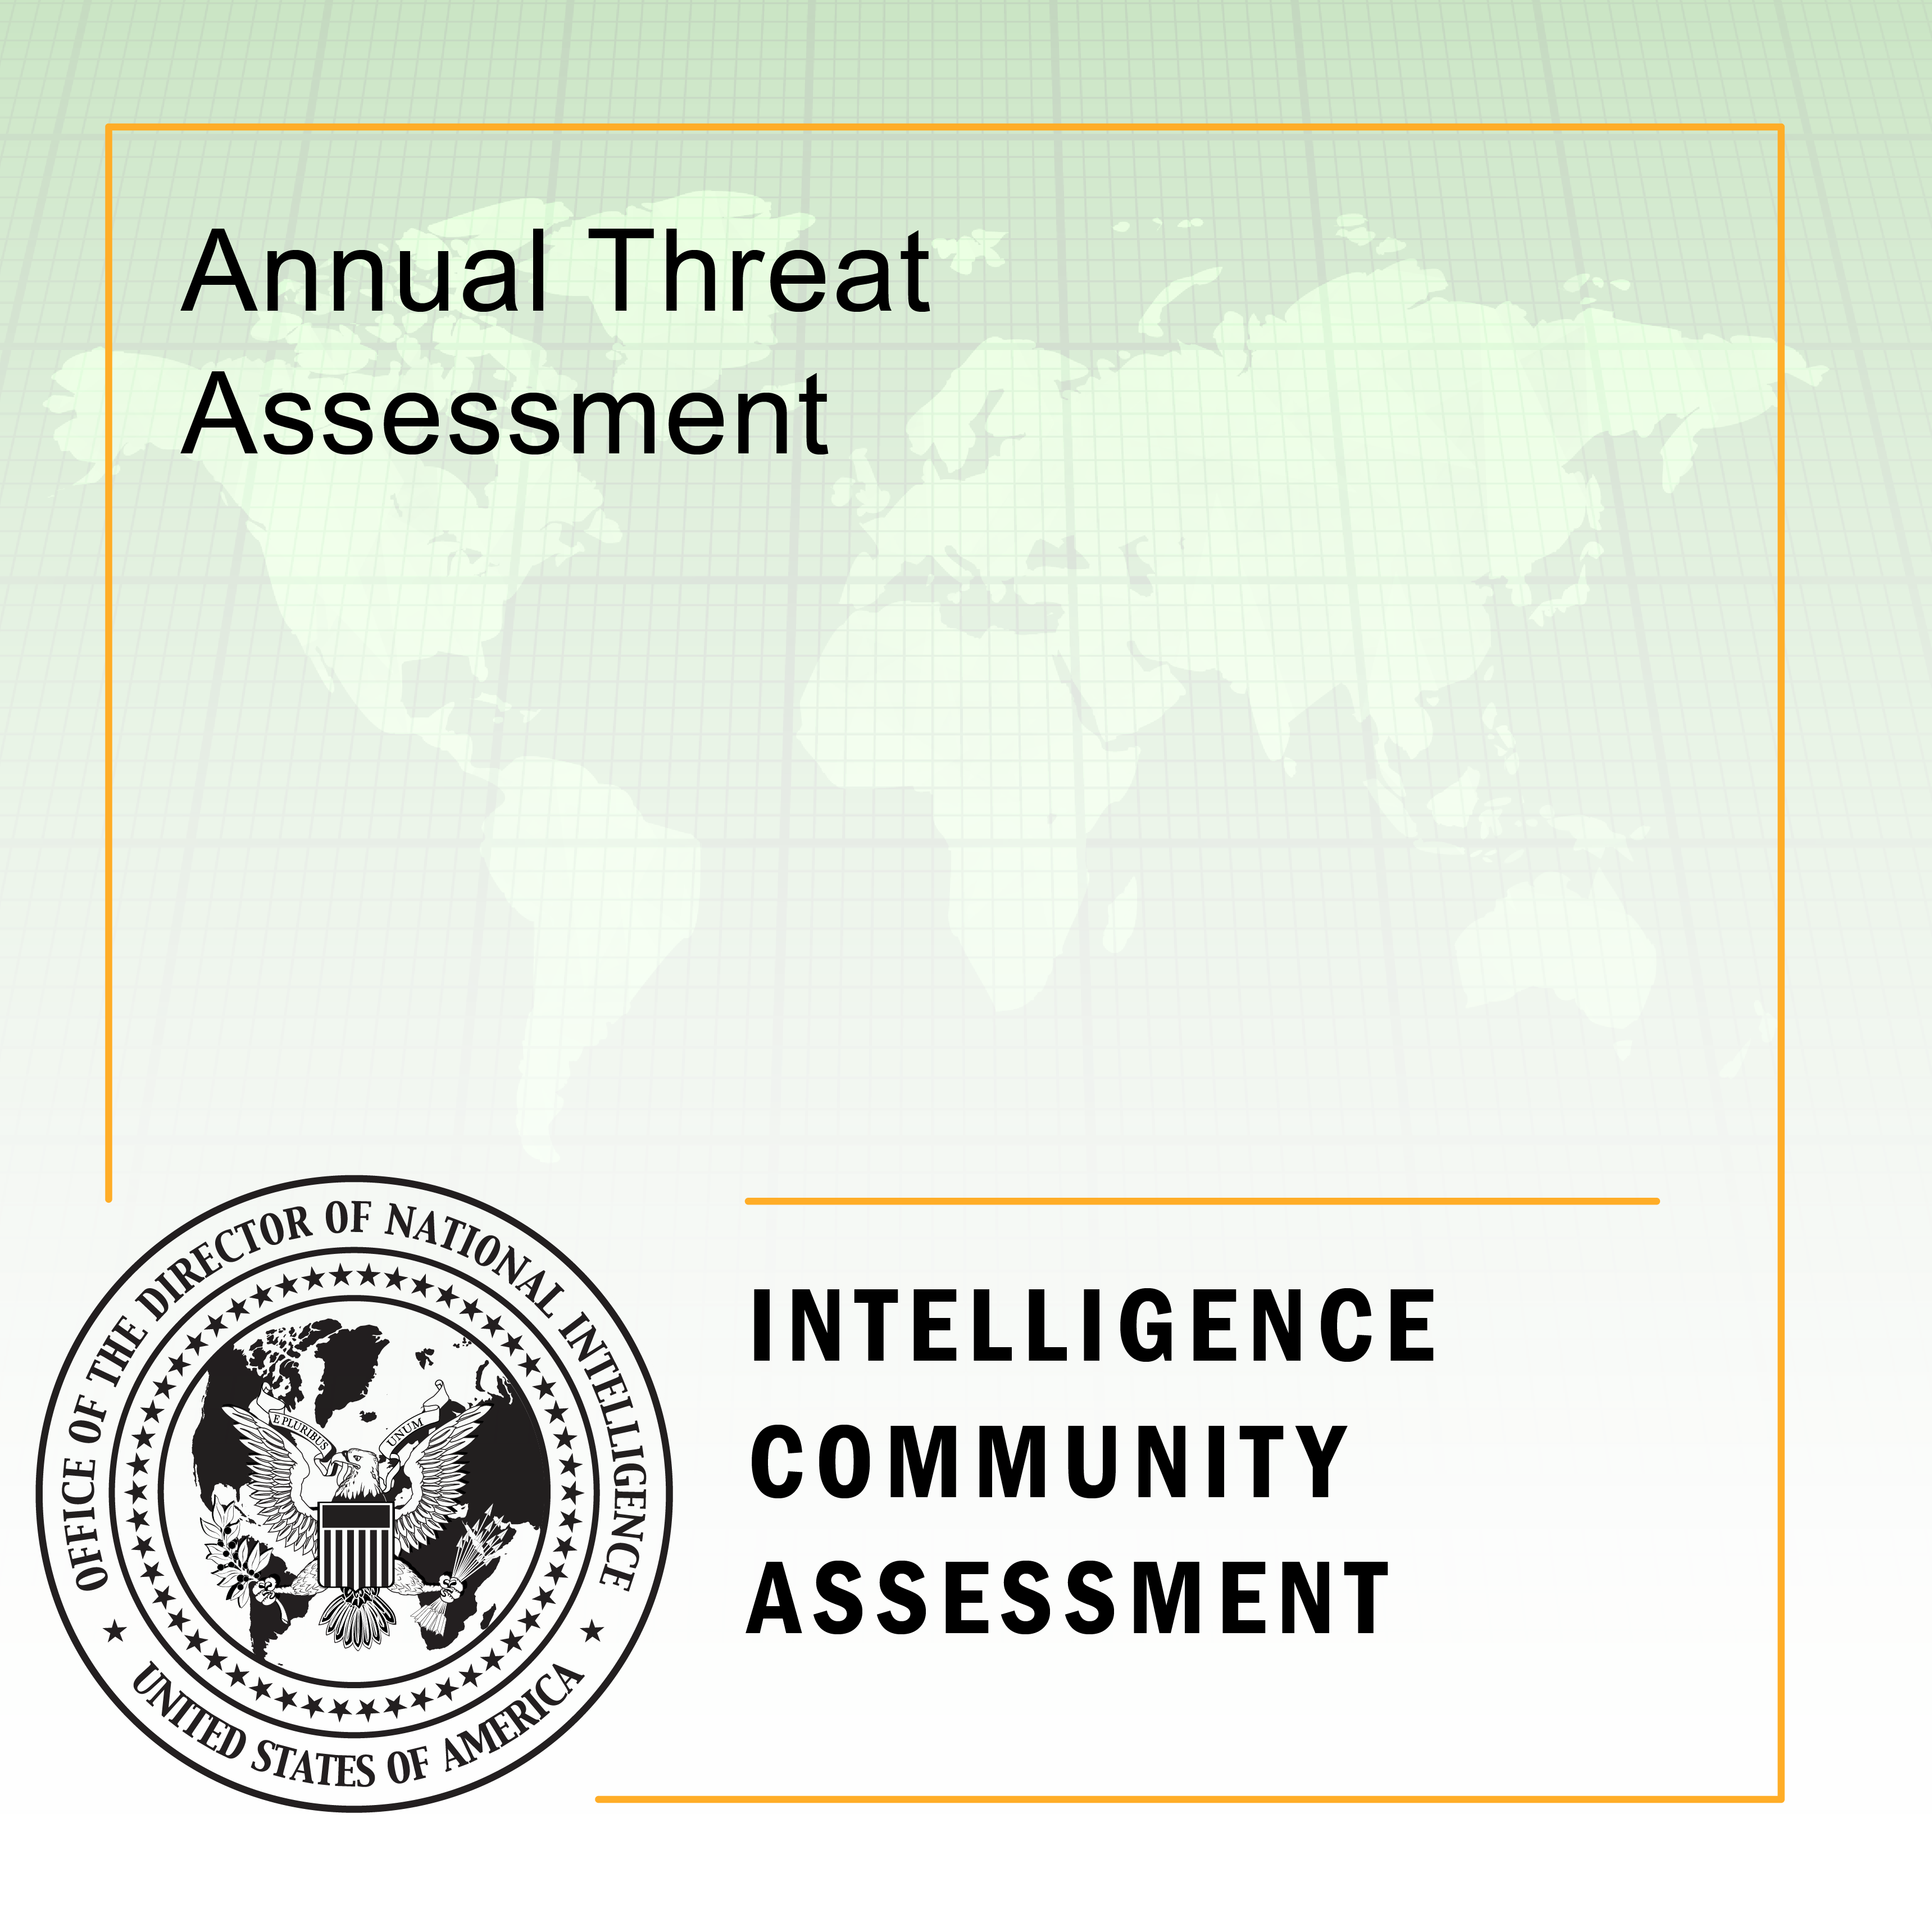 Chief of the National Threat Assessment Center